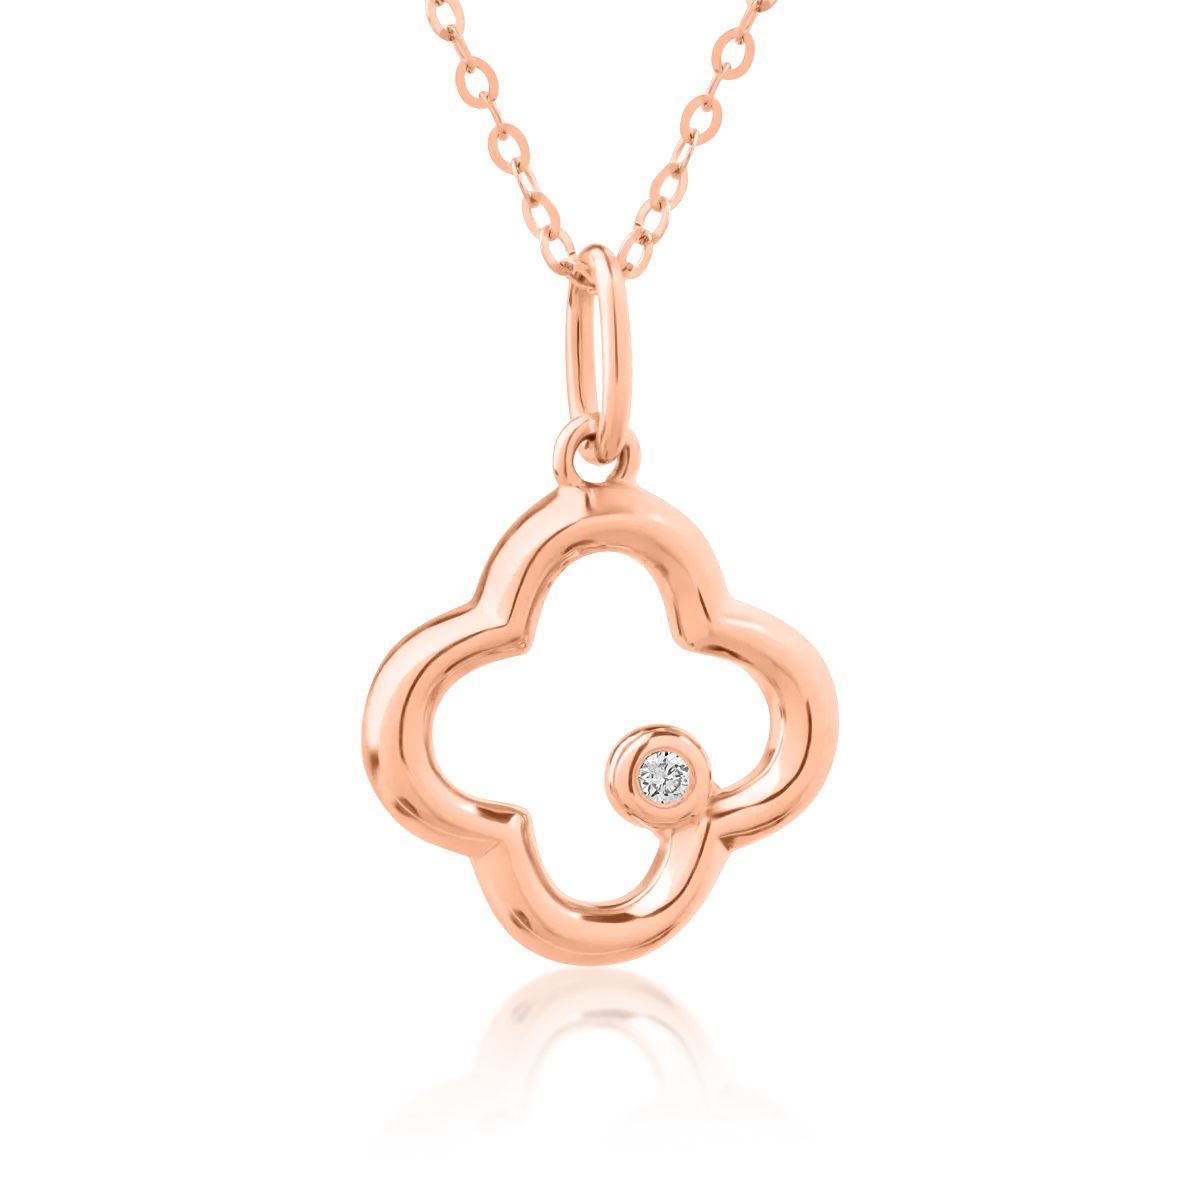 18K rose gold pendant necklace with 0.009ct diamond